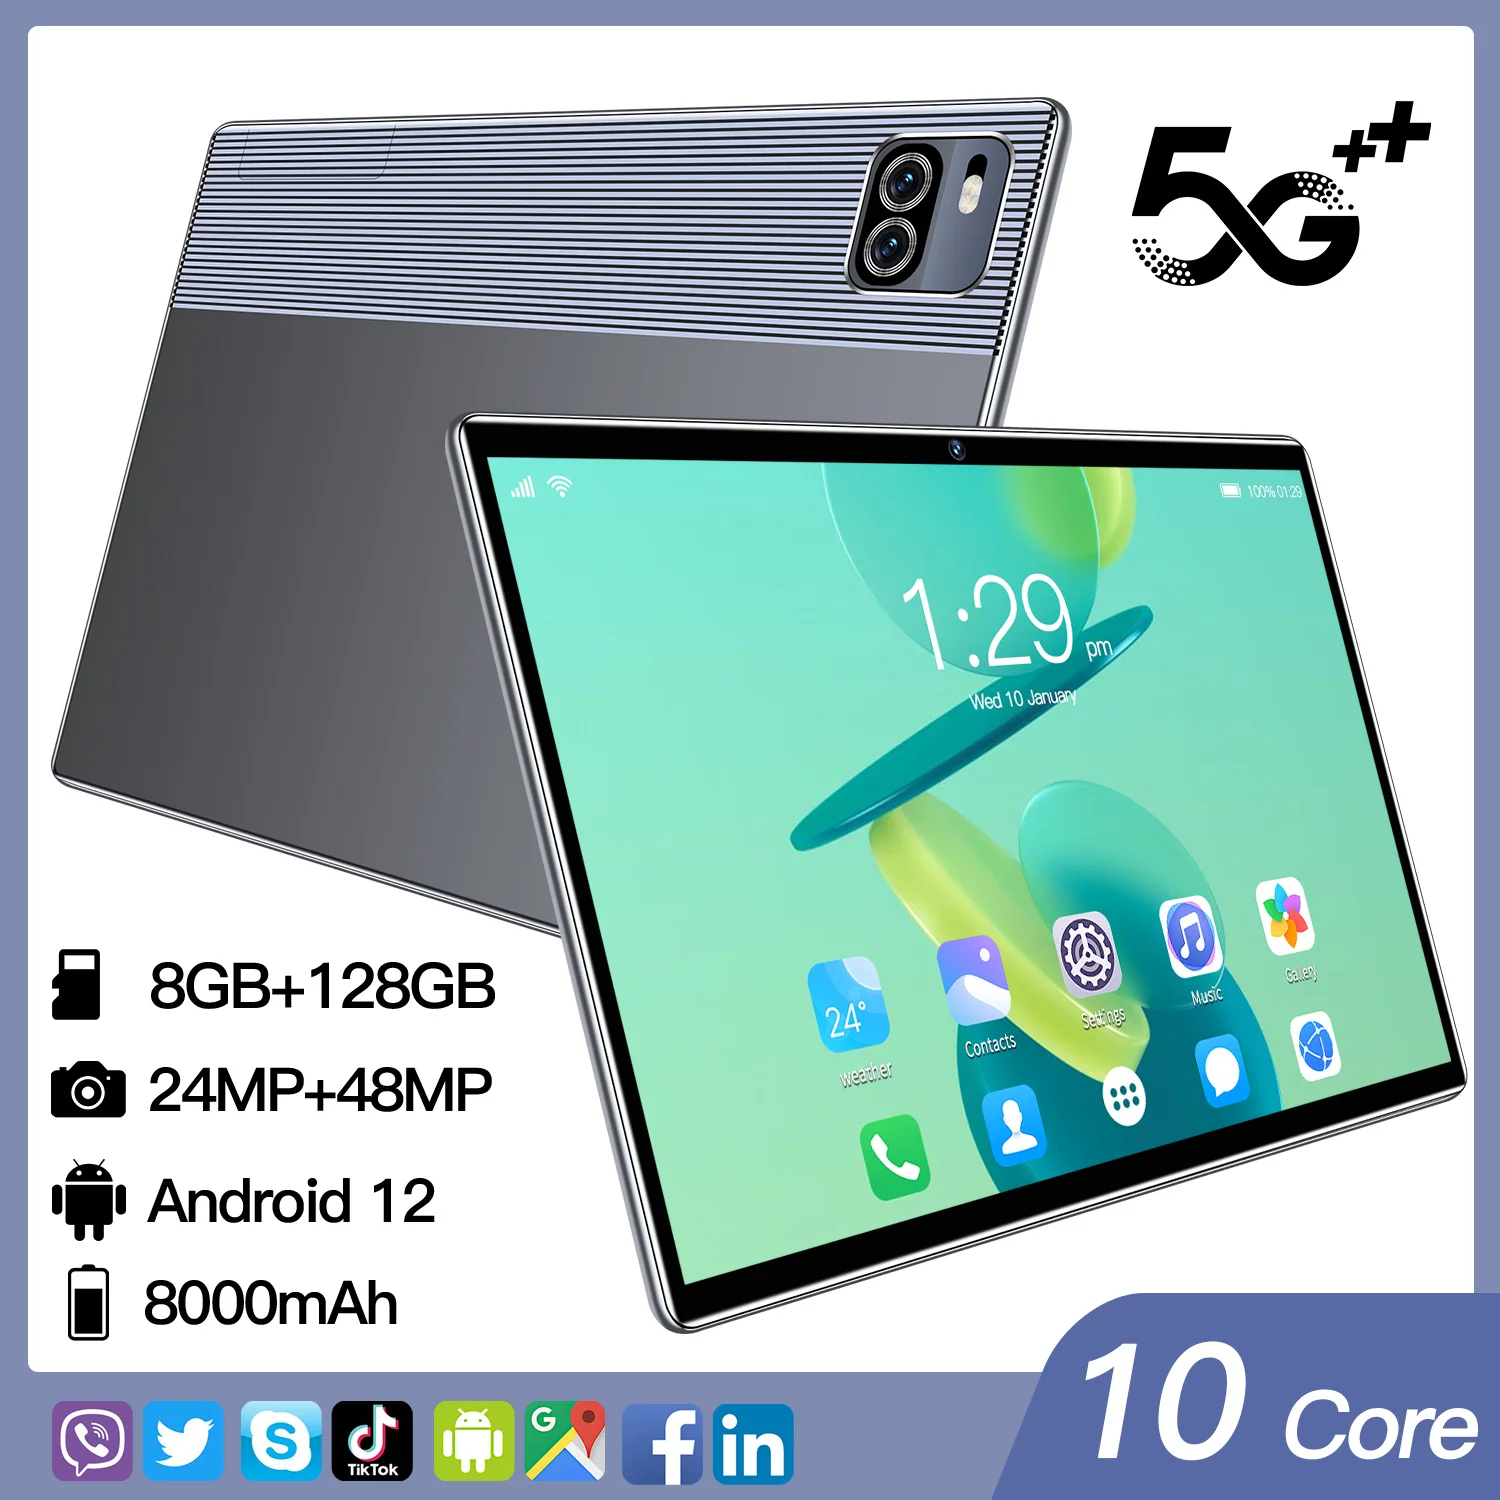 2022 New 10.1-inch tablet computer Android12 tablet computer 8GB+128GB mobile phone eight core 5G+dual card GPS+wifi+Bluetooth